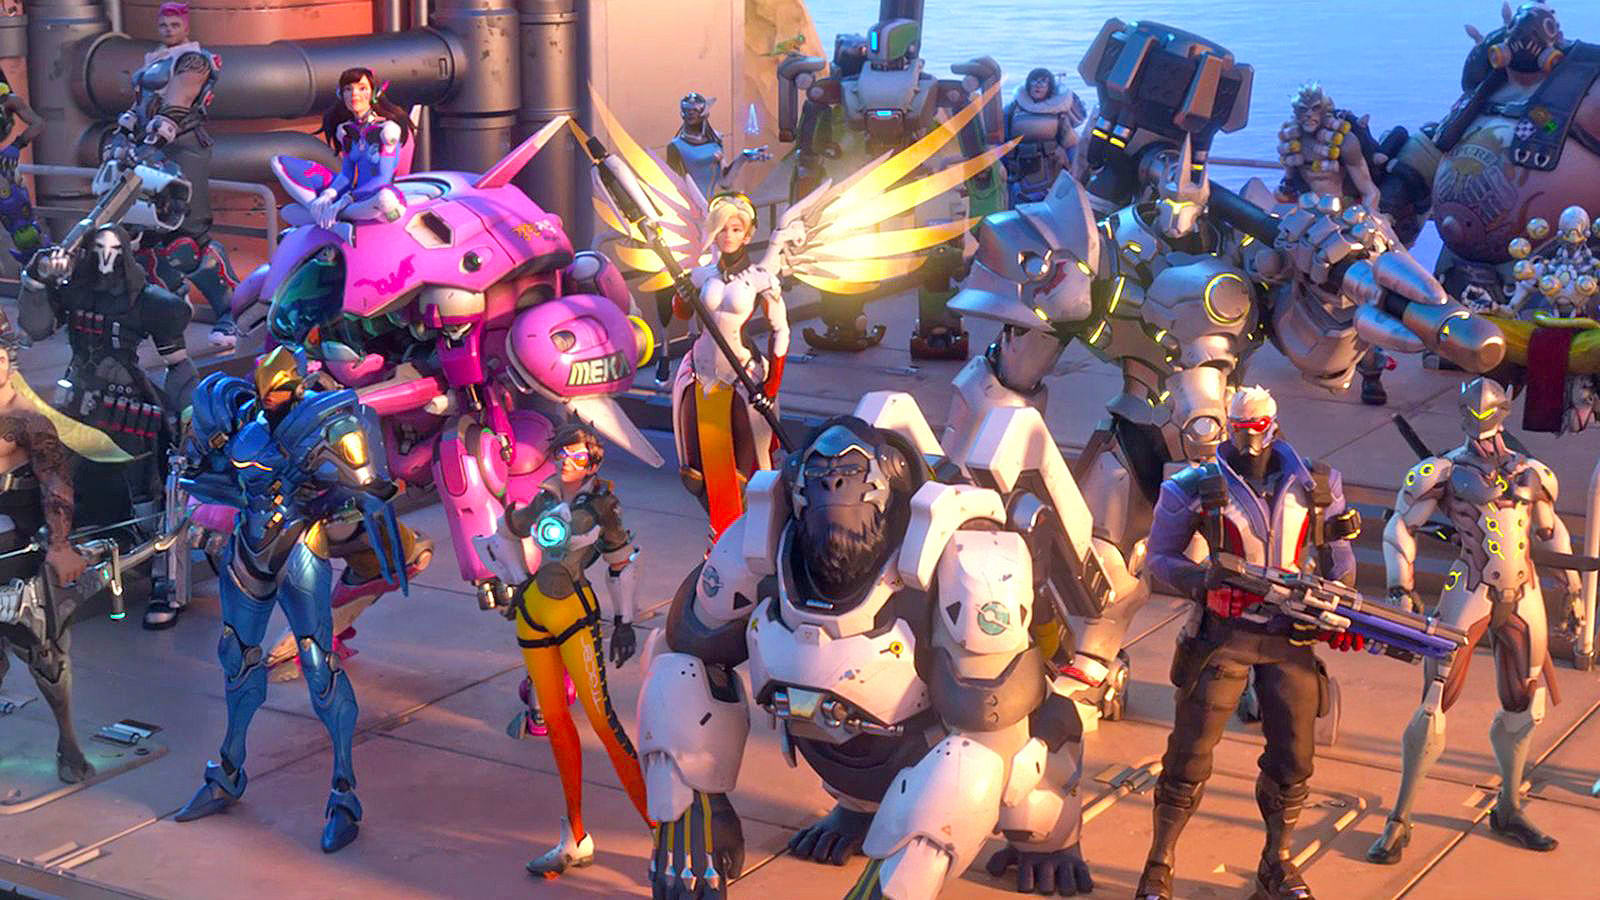 Overwatch by Blizzard, a highly sought after game developer to work for.